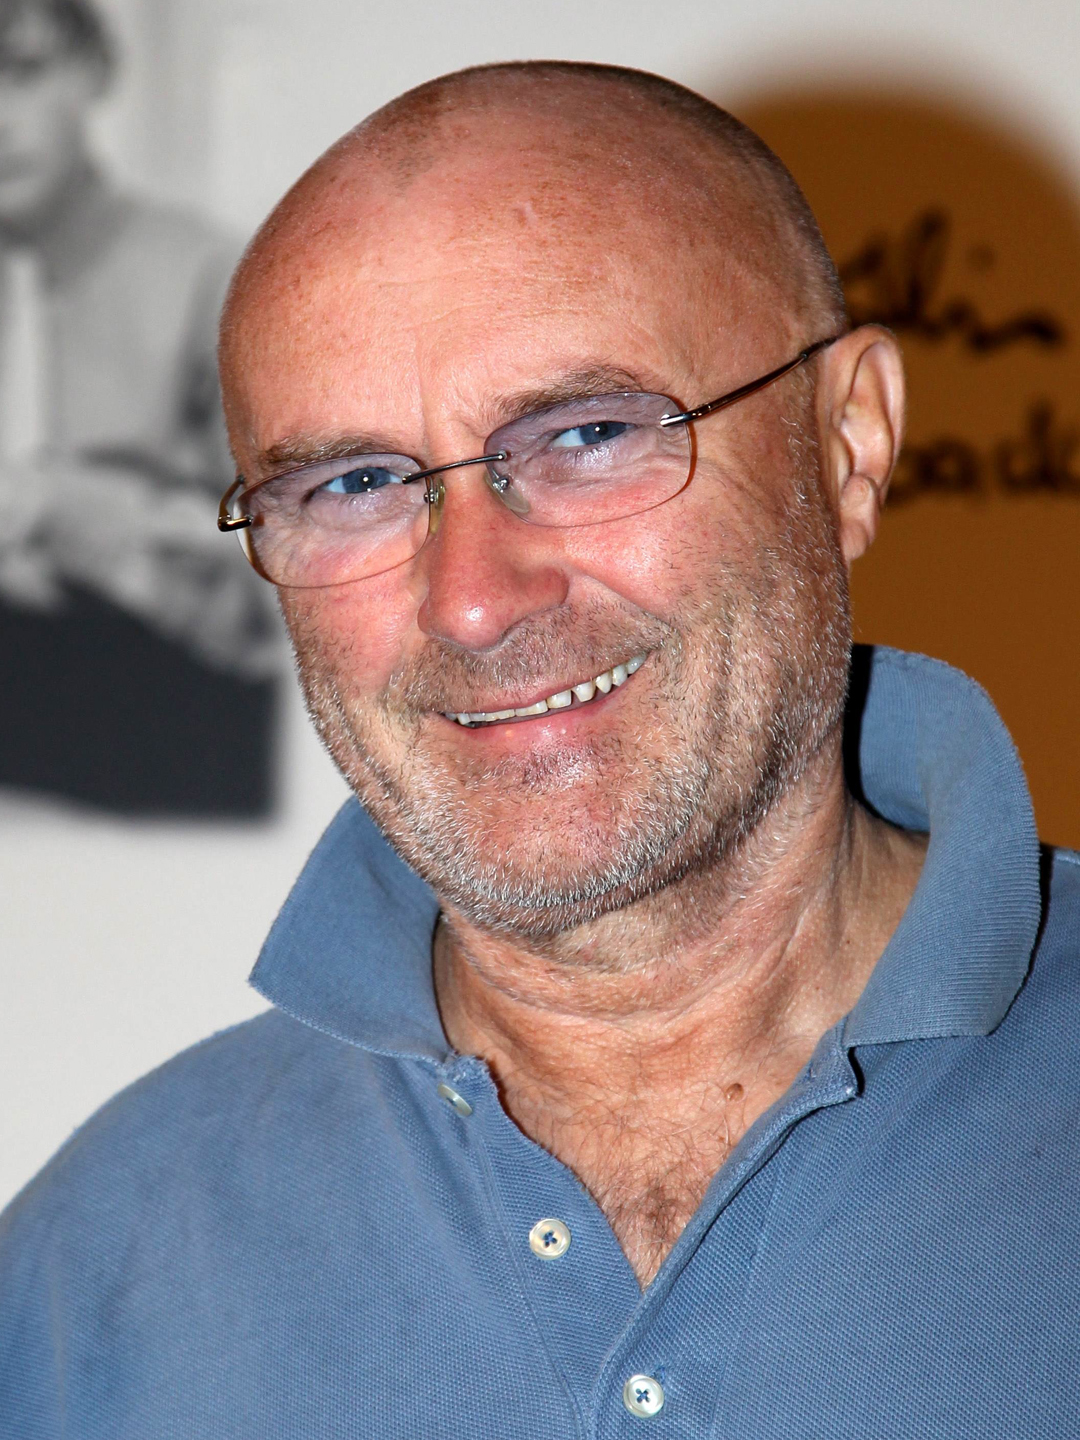 How tall is Phil Collins?